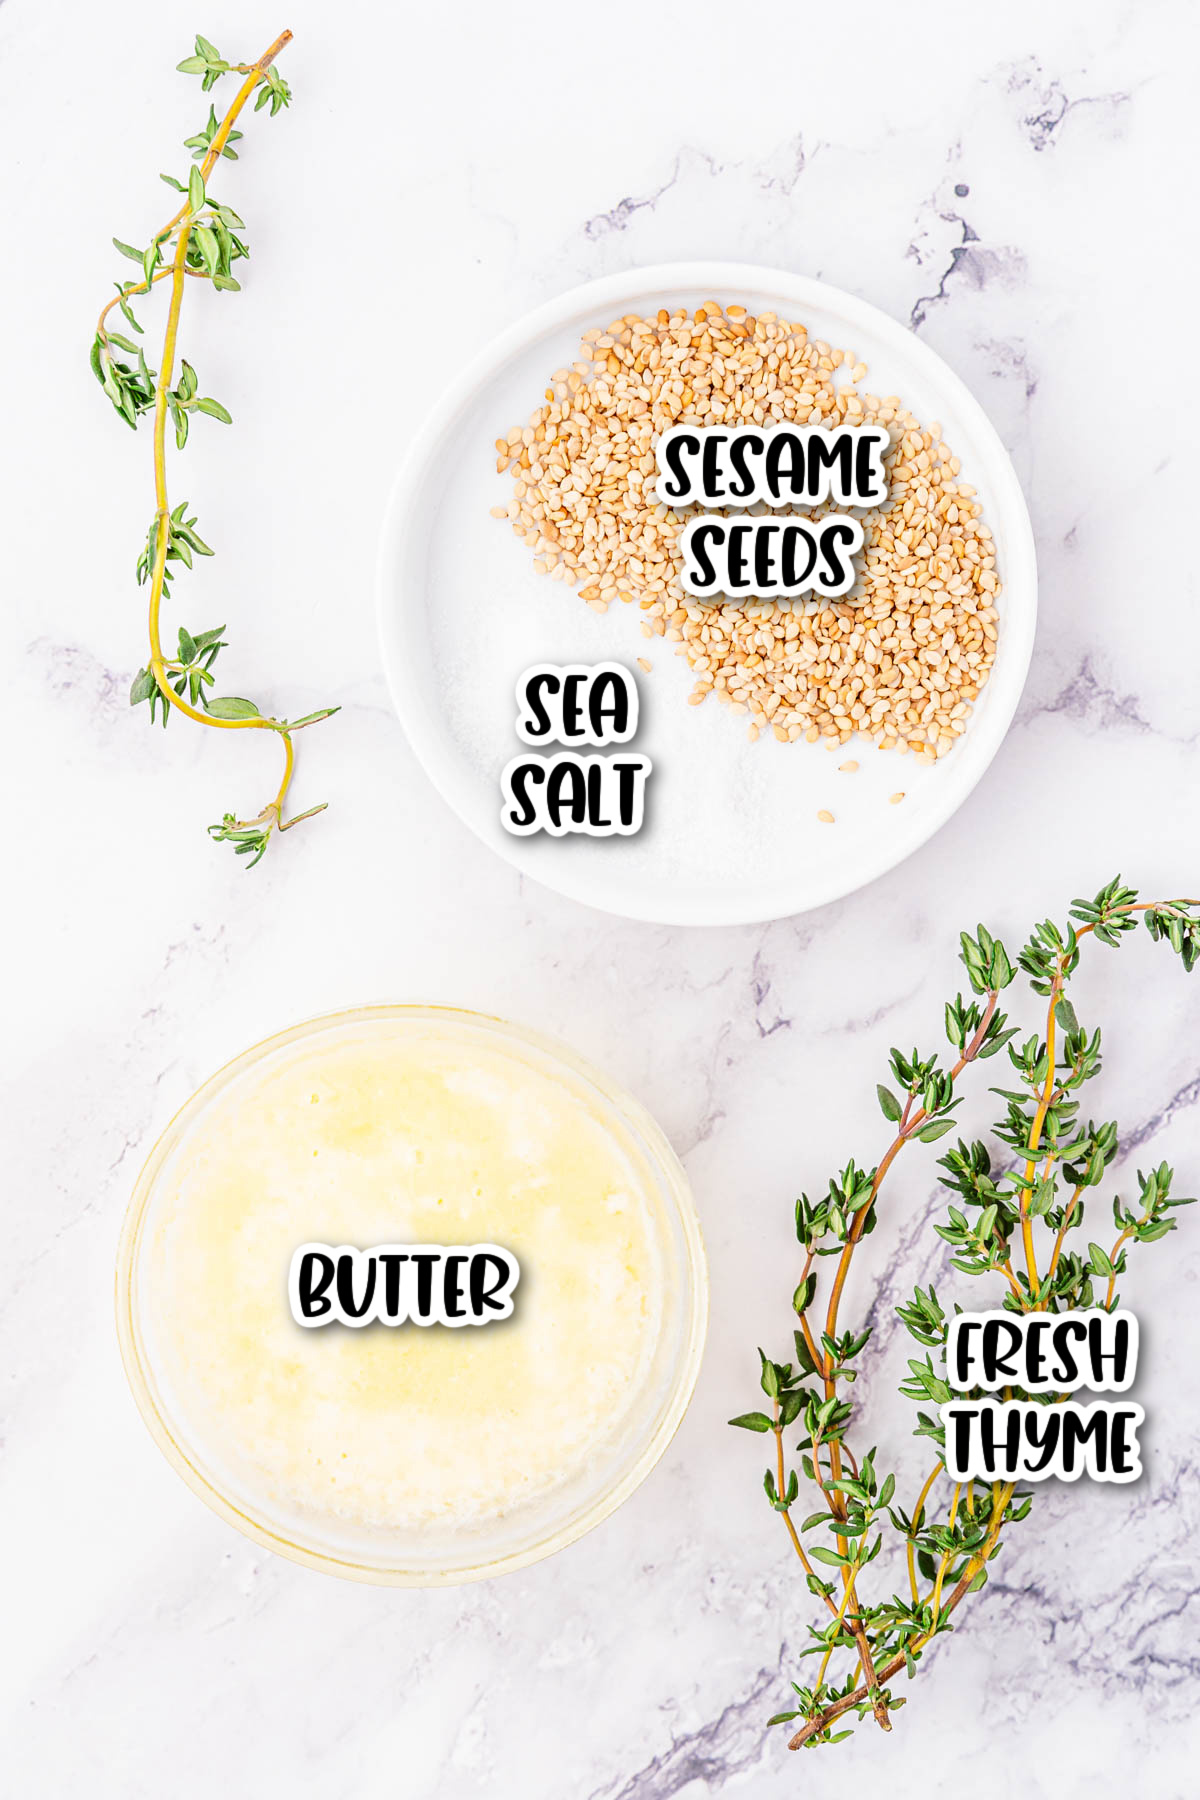 Thyme, sea salt, and other ingredients on a marble countertop.